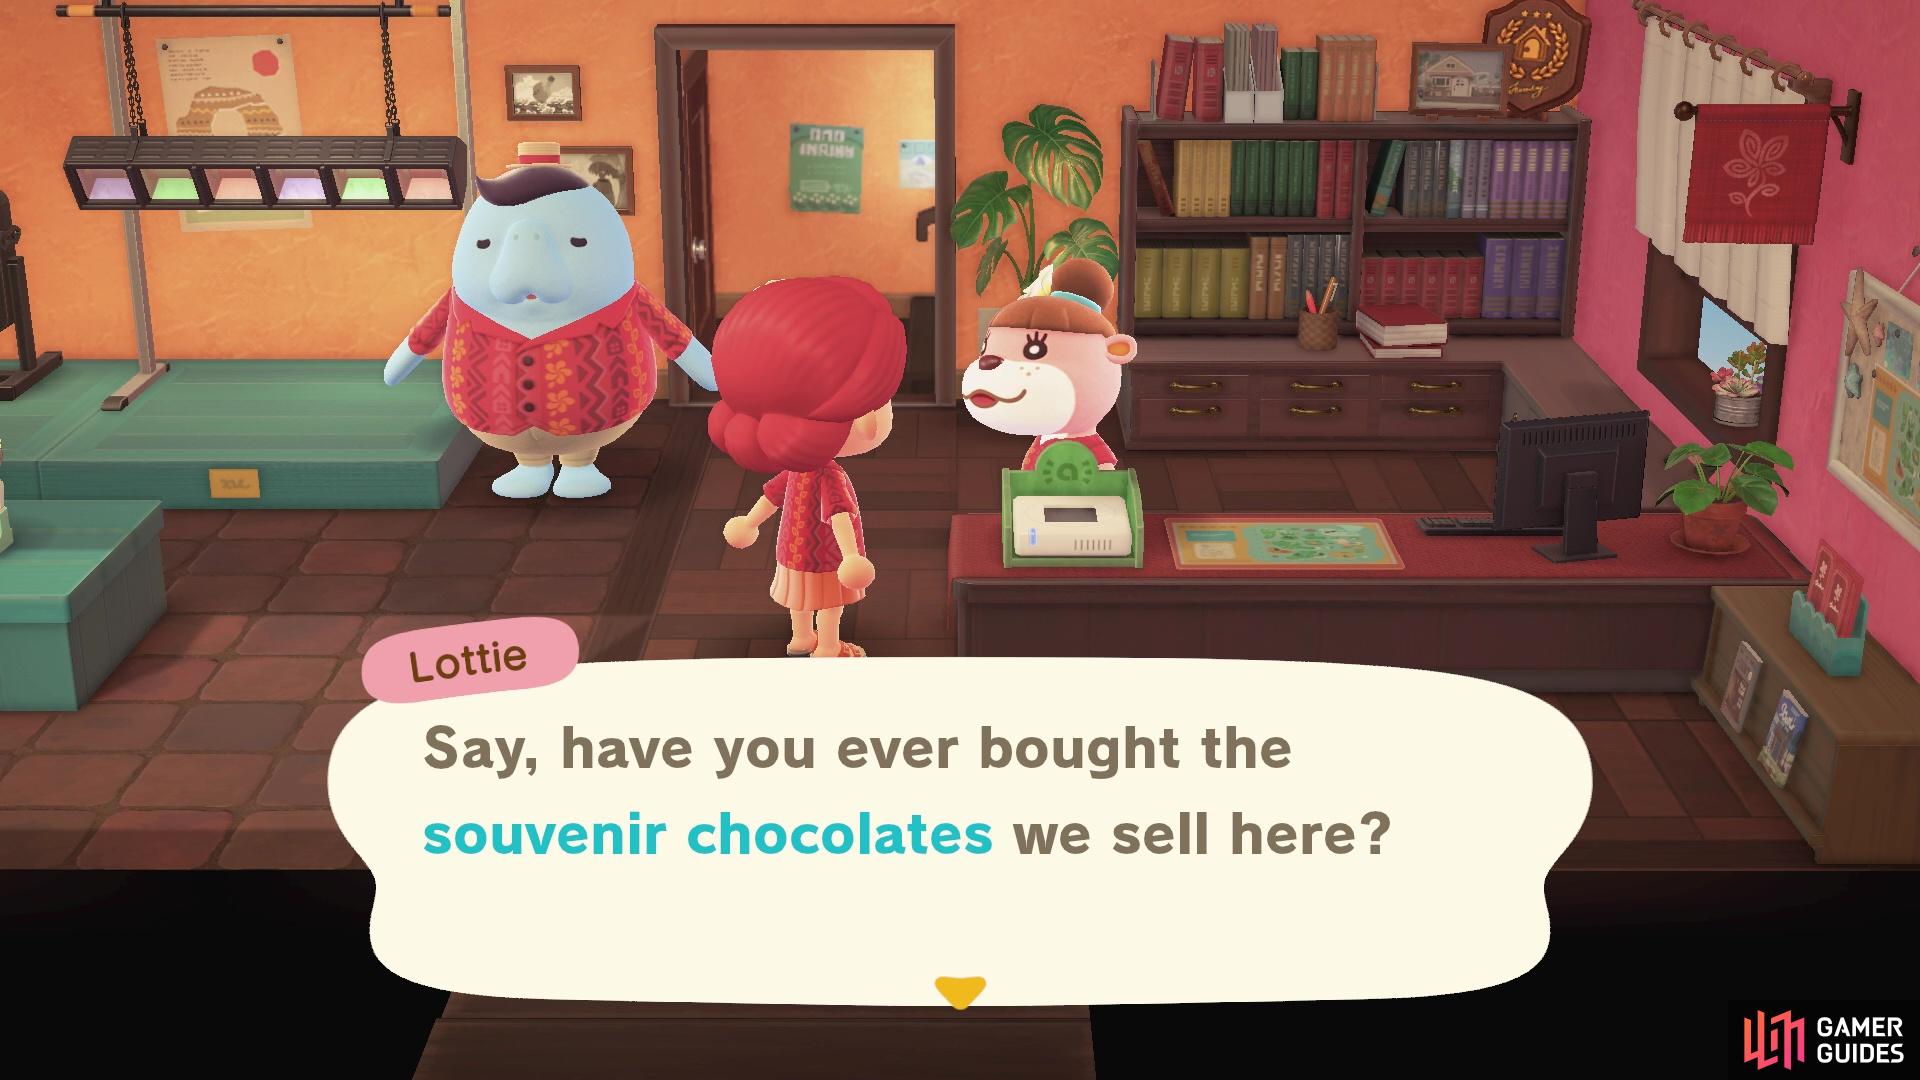 Lottie will tell you about the chocolates on sale